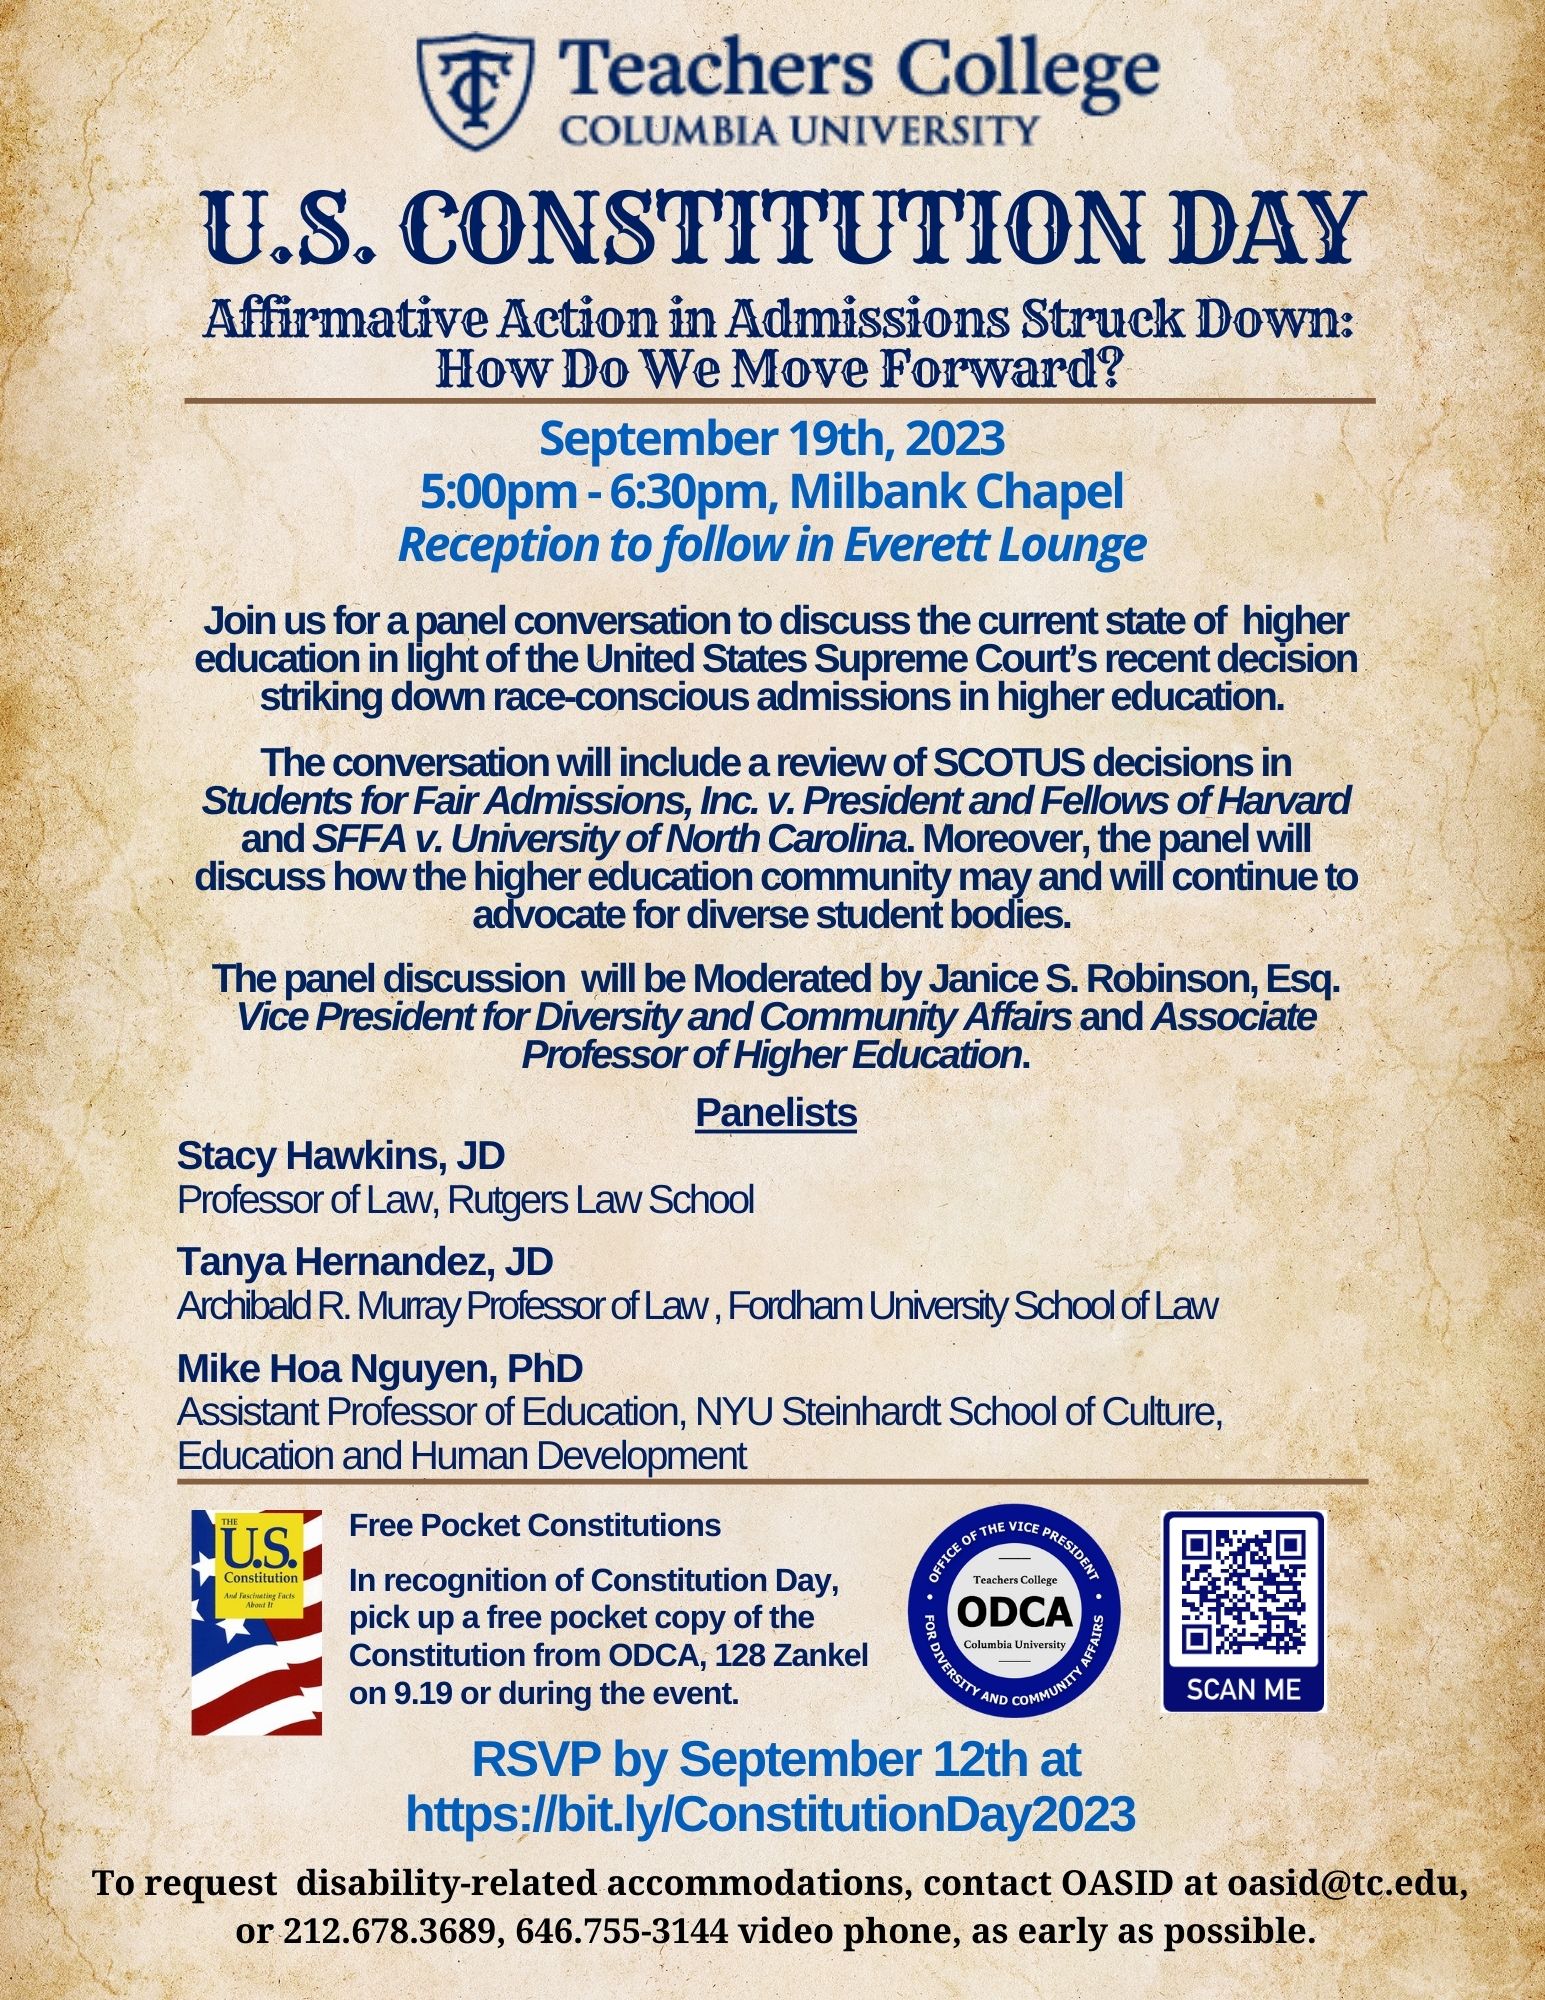 Event Flyer for U.S. Constitution Day: Affirmative Action in Admissions Struck Down: How Do We Move Forward?; For more details, refer to the event descriptions below.